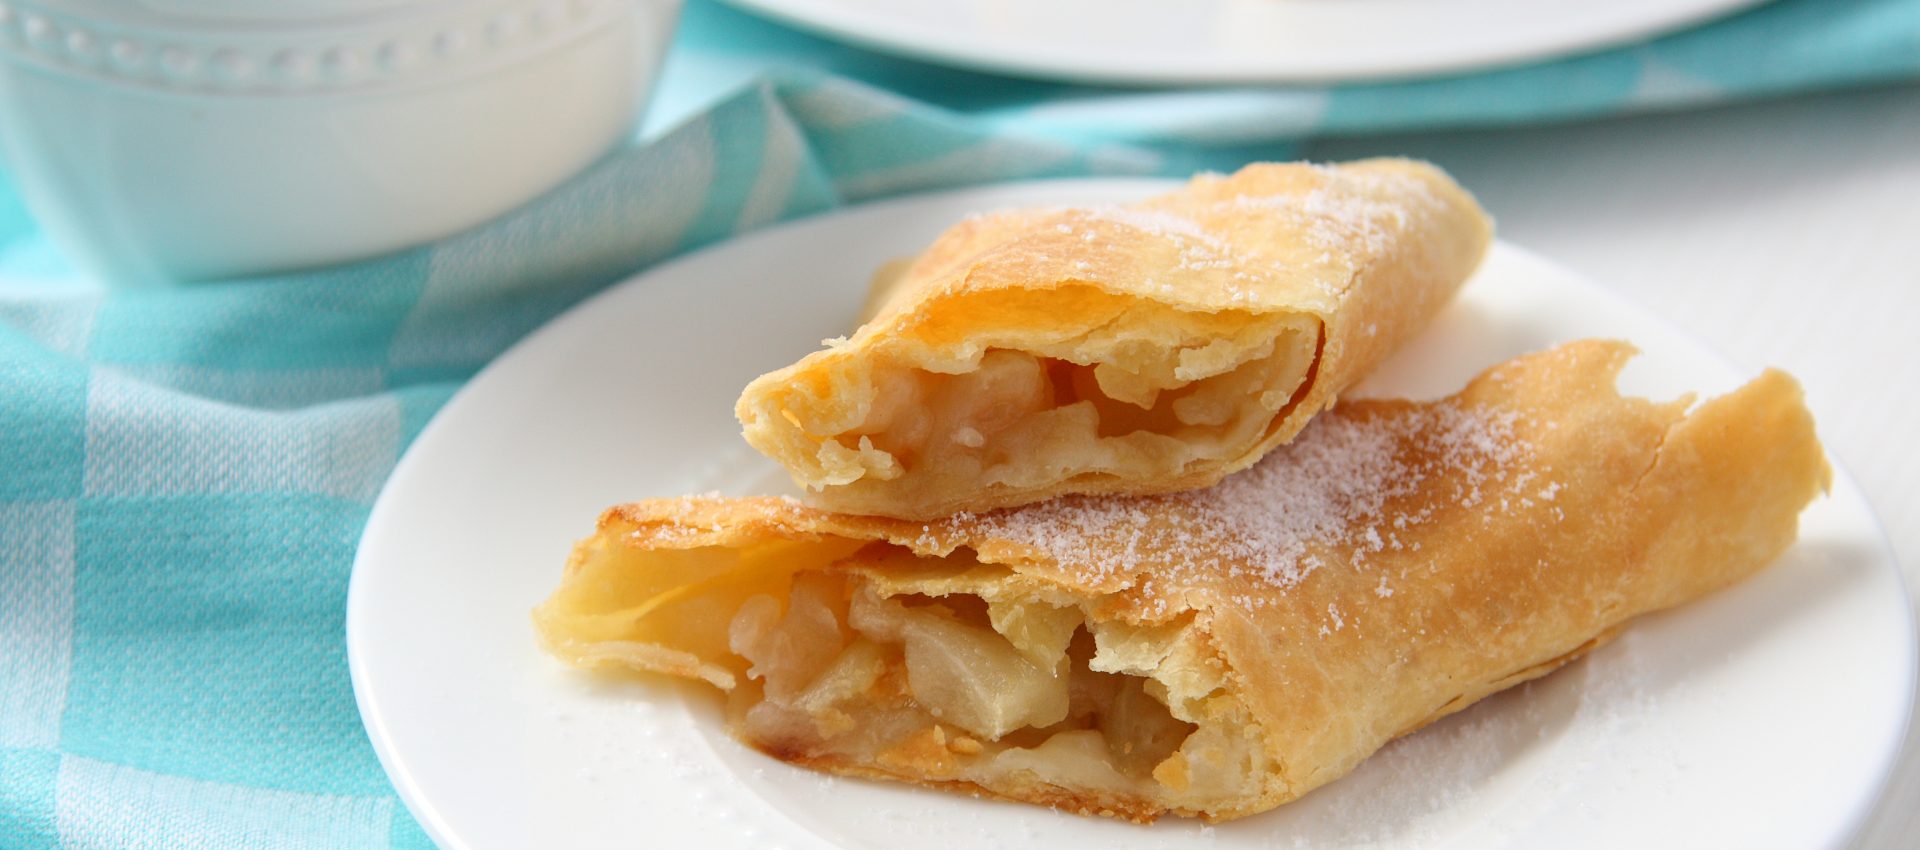 Pear and Apple Filled Crepes